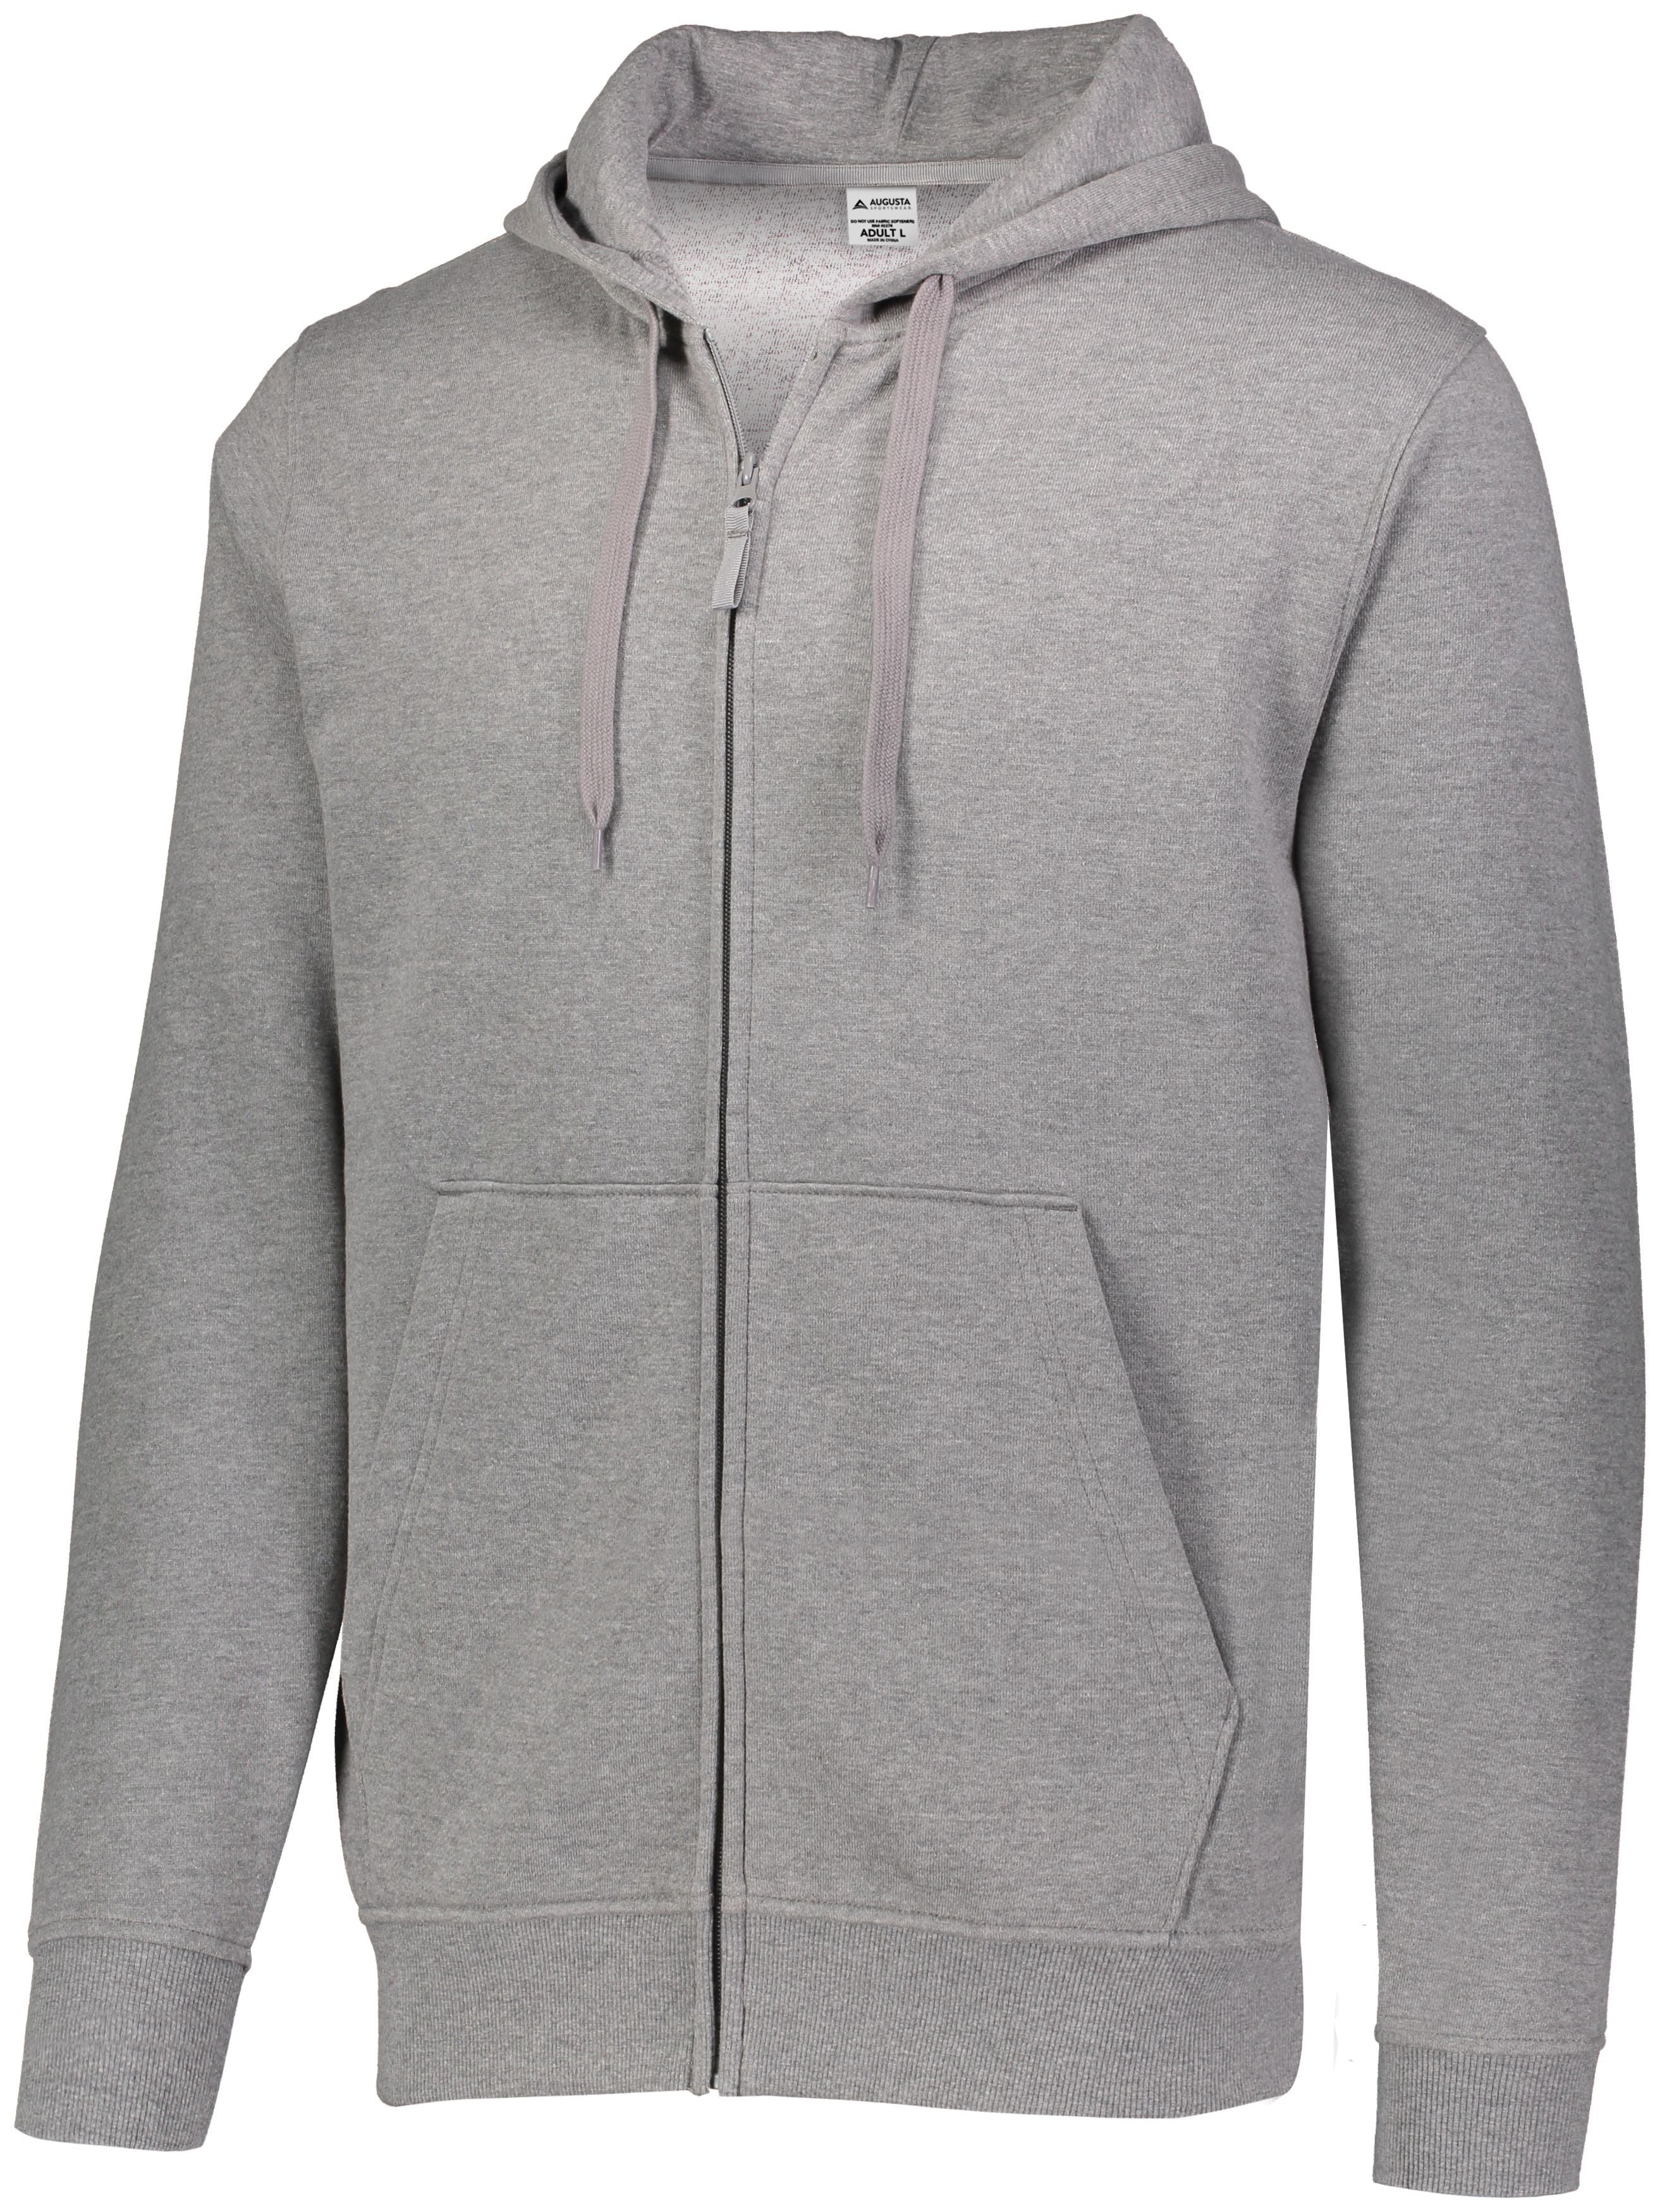 Augusta Sportswear 60/40 Fleece Full Zip Hoodie in Charcoal Heather  -Part of the Adult, Adult-Hoodie, Hoodies, Augusta-Products product lines at KanaleyCreations.com